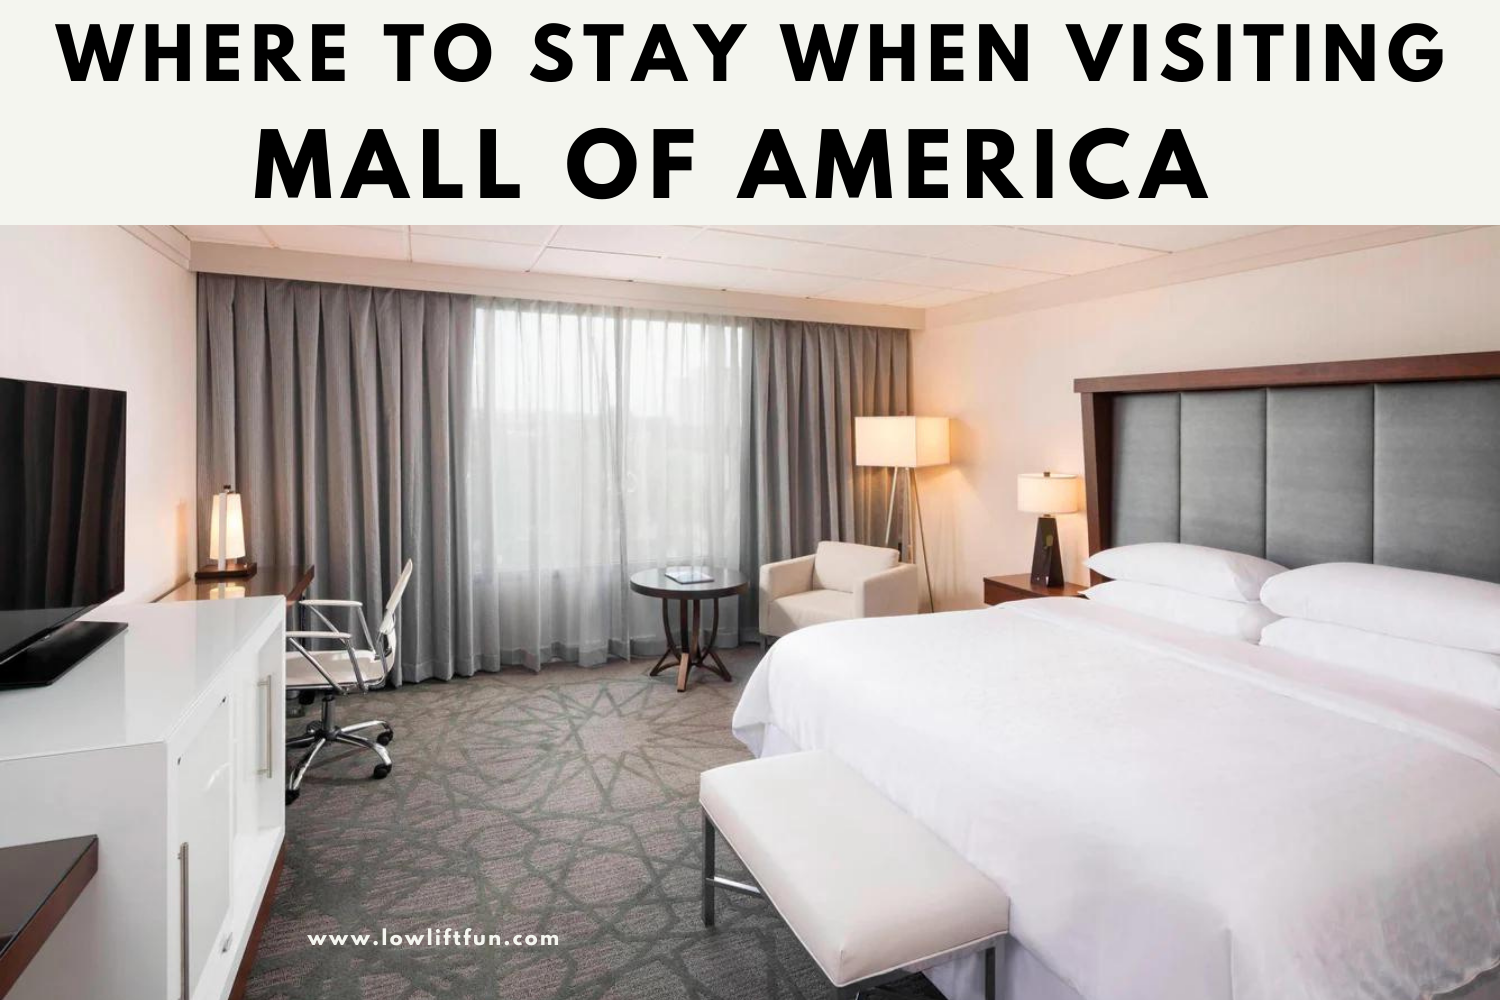 Where should we stay when visiting Mall of America?